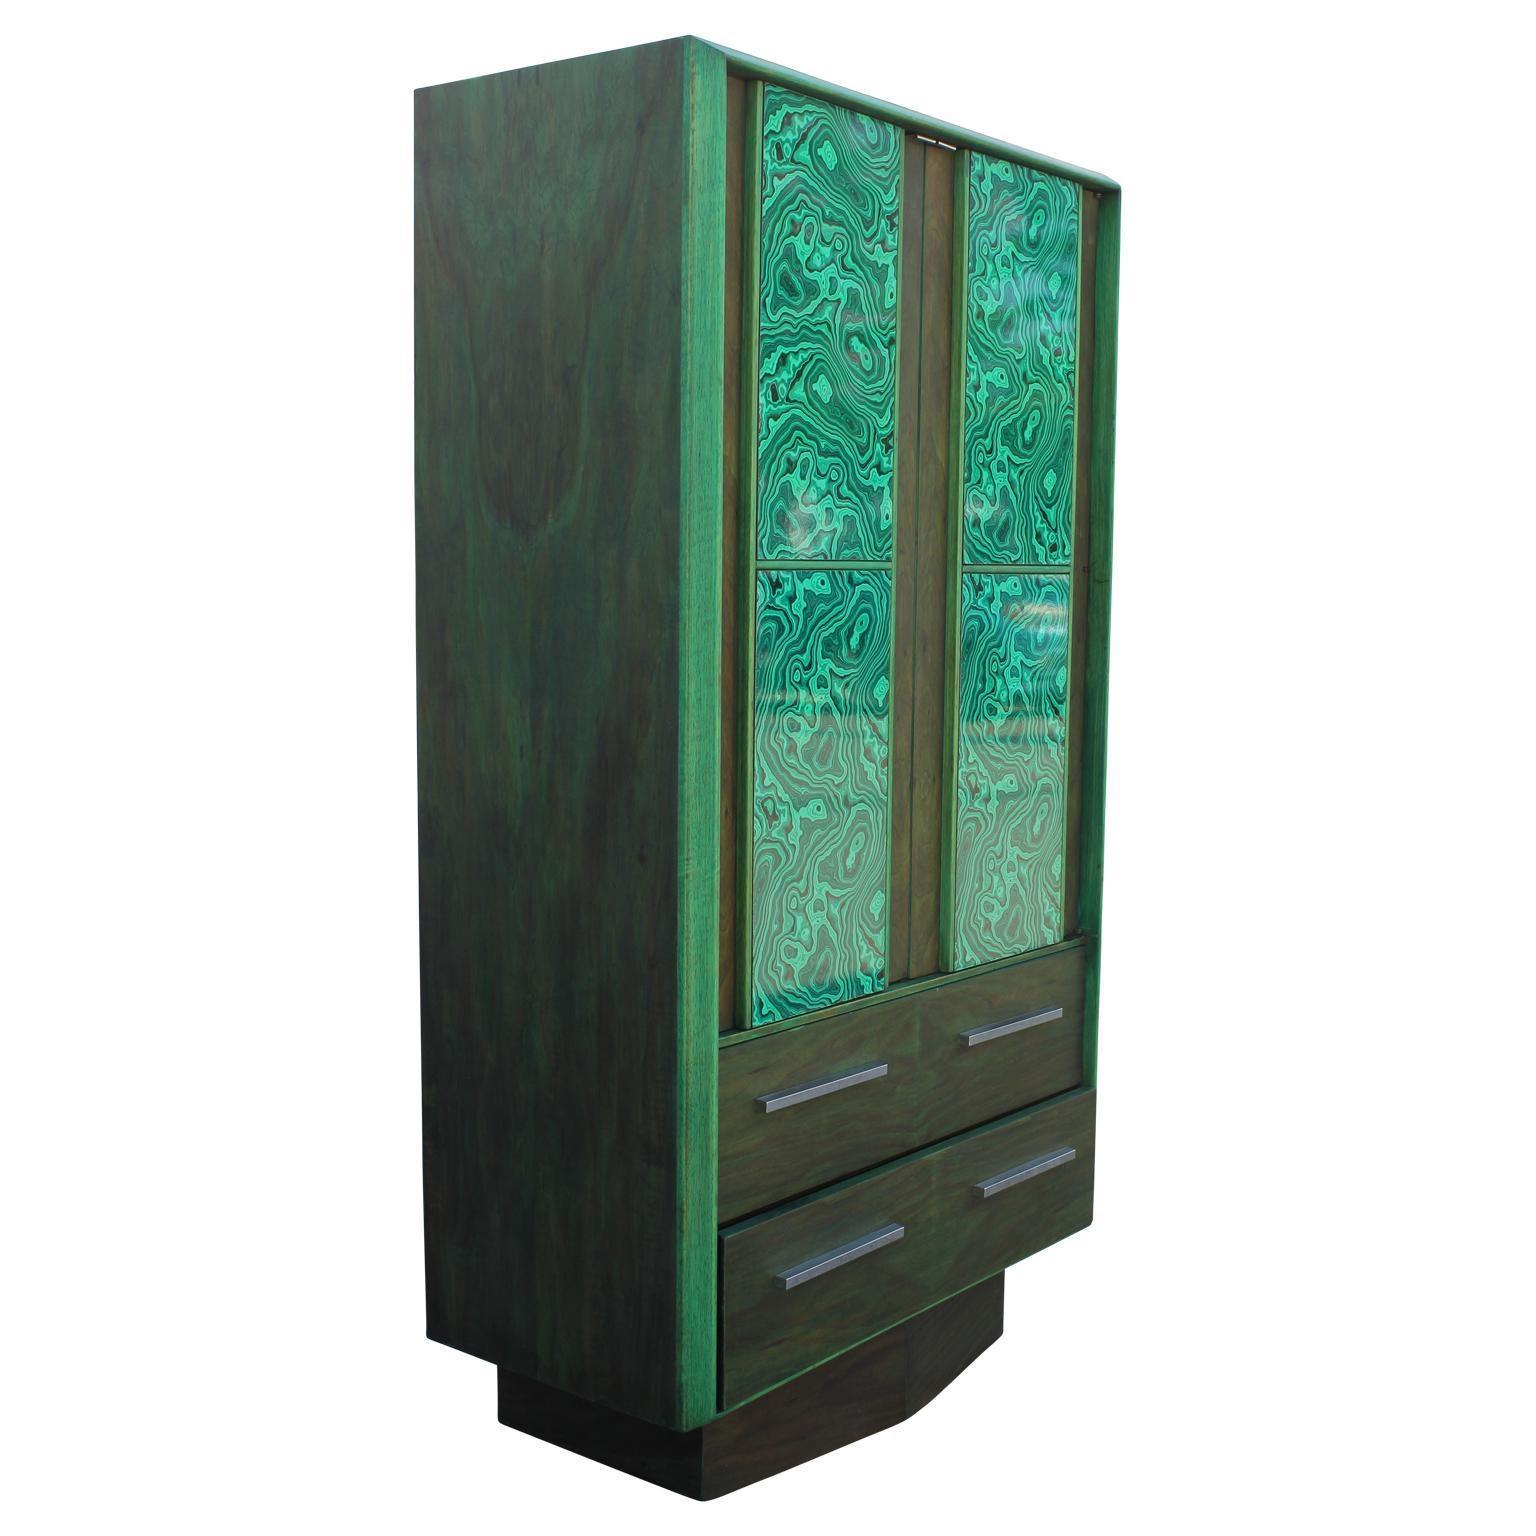 Green dyed walnut dresser with faux Malachite panels. Original Lane Furniture cabinet restored by the Reeves Art and Design team.